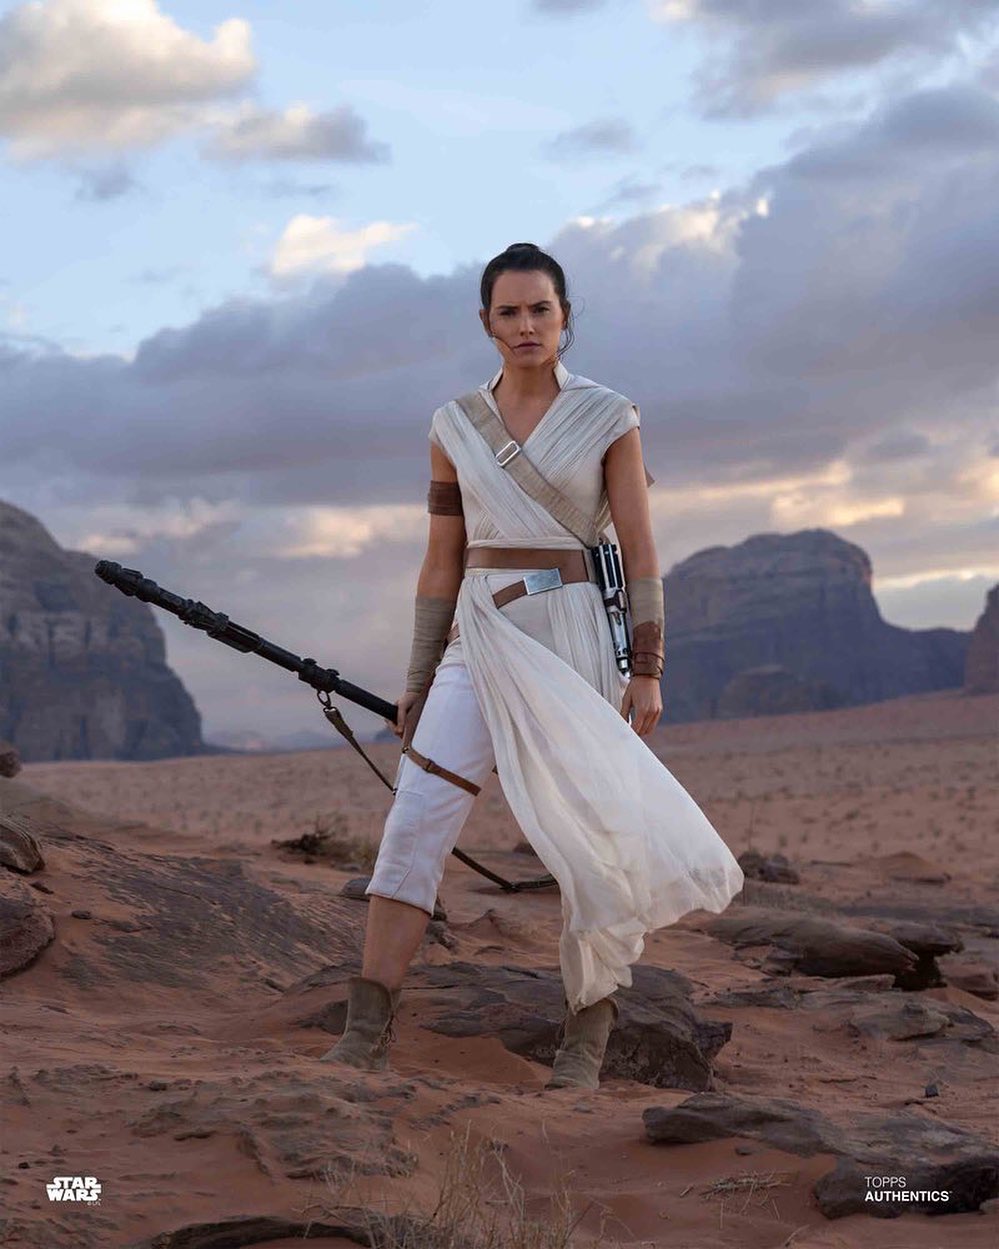 Daisy Ridley played the role of Rey in the Star War franchise.